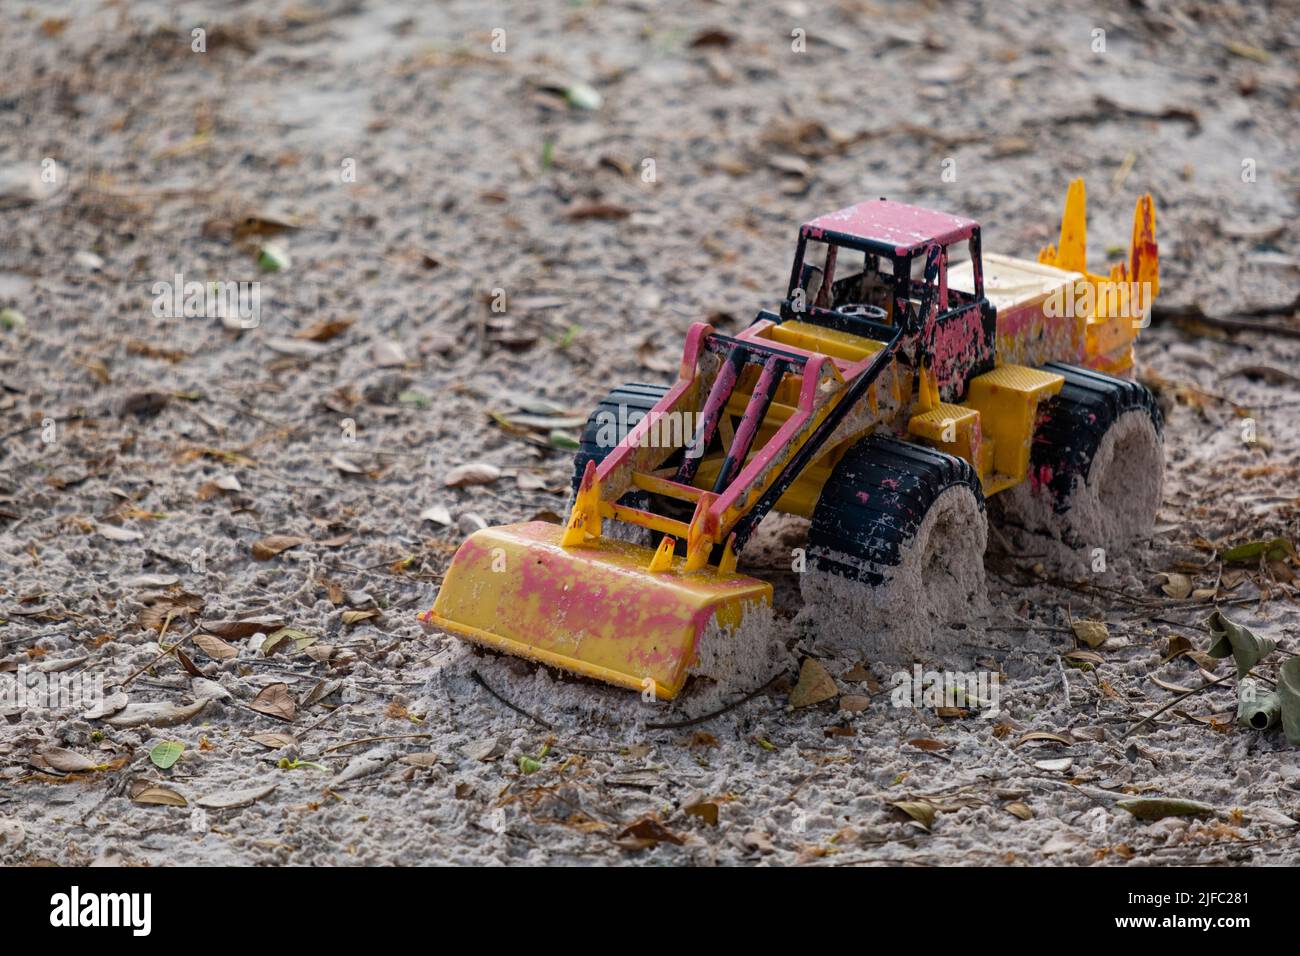 plastic toy car damaged and abandoned in sand. Stock Photo